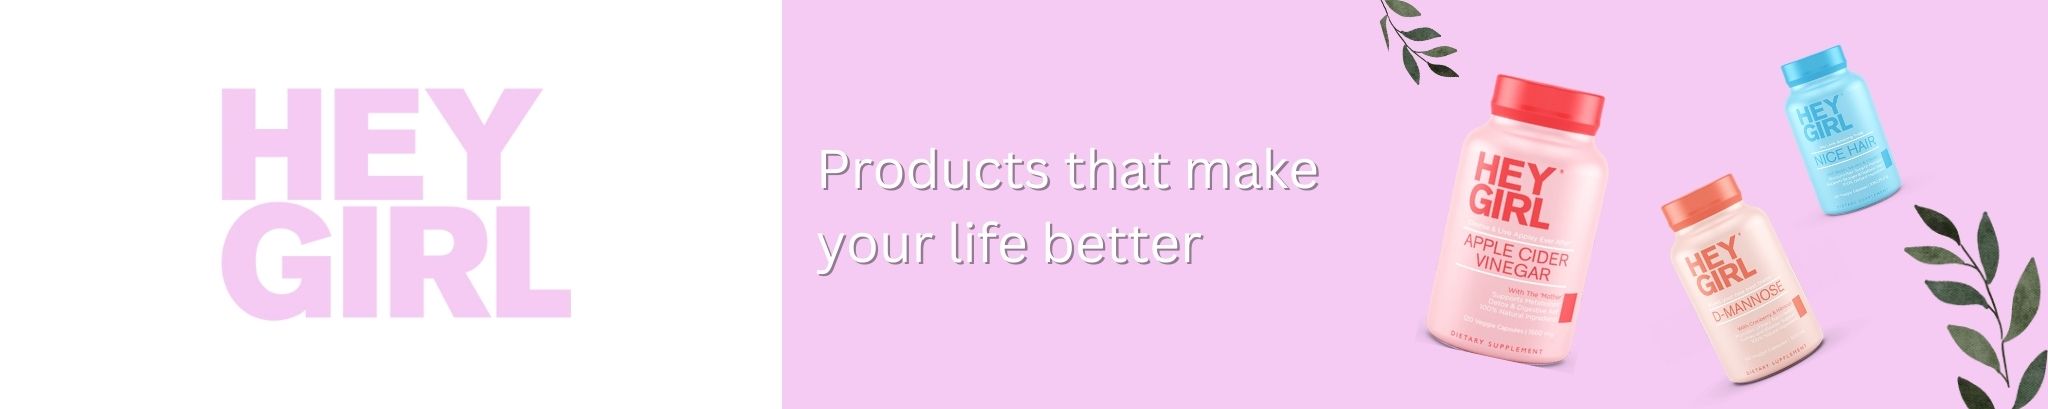 Hey Girl - Products